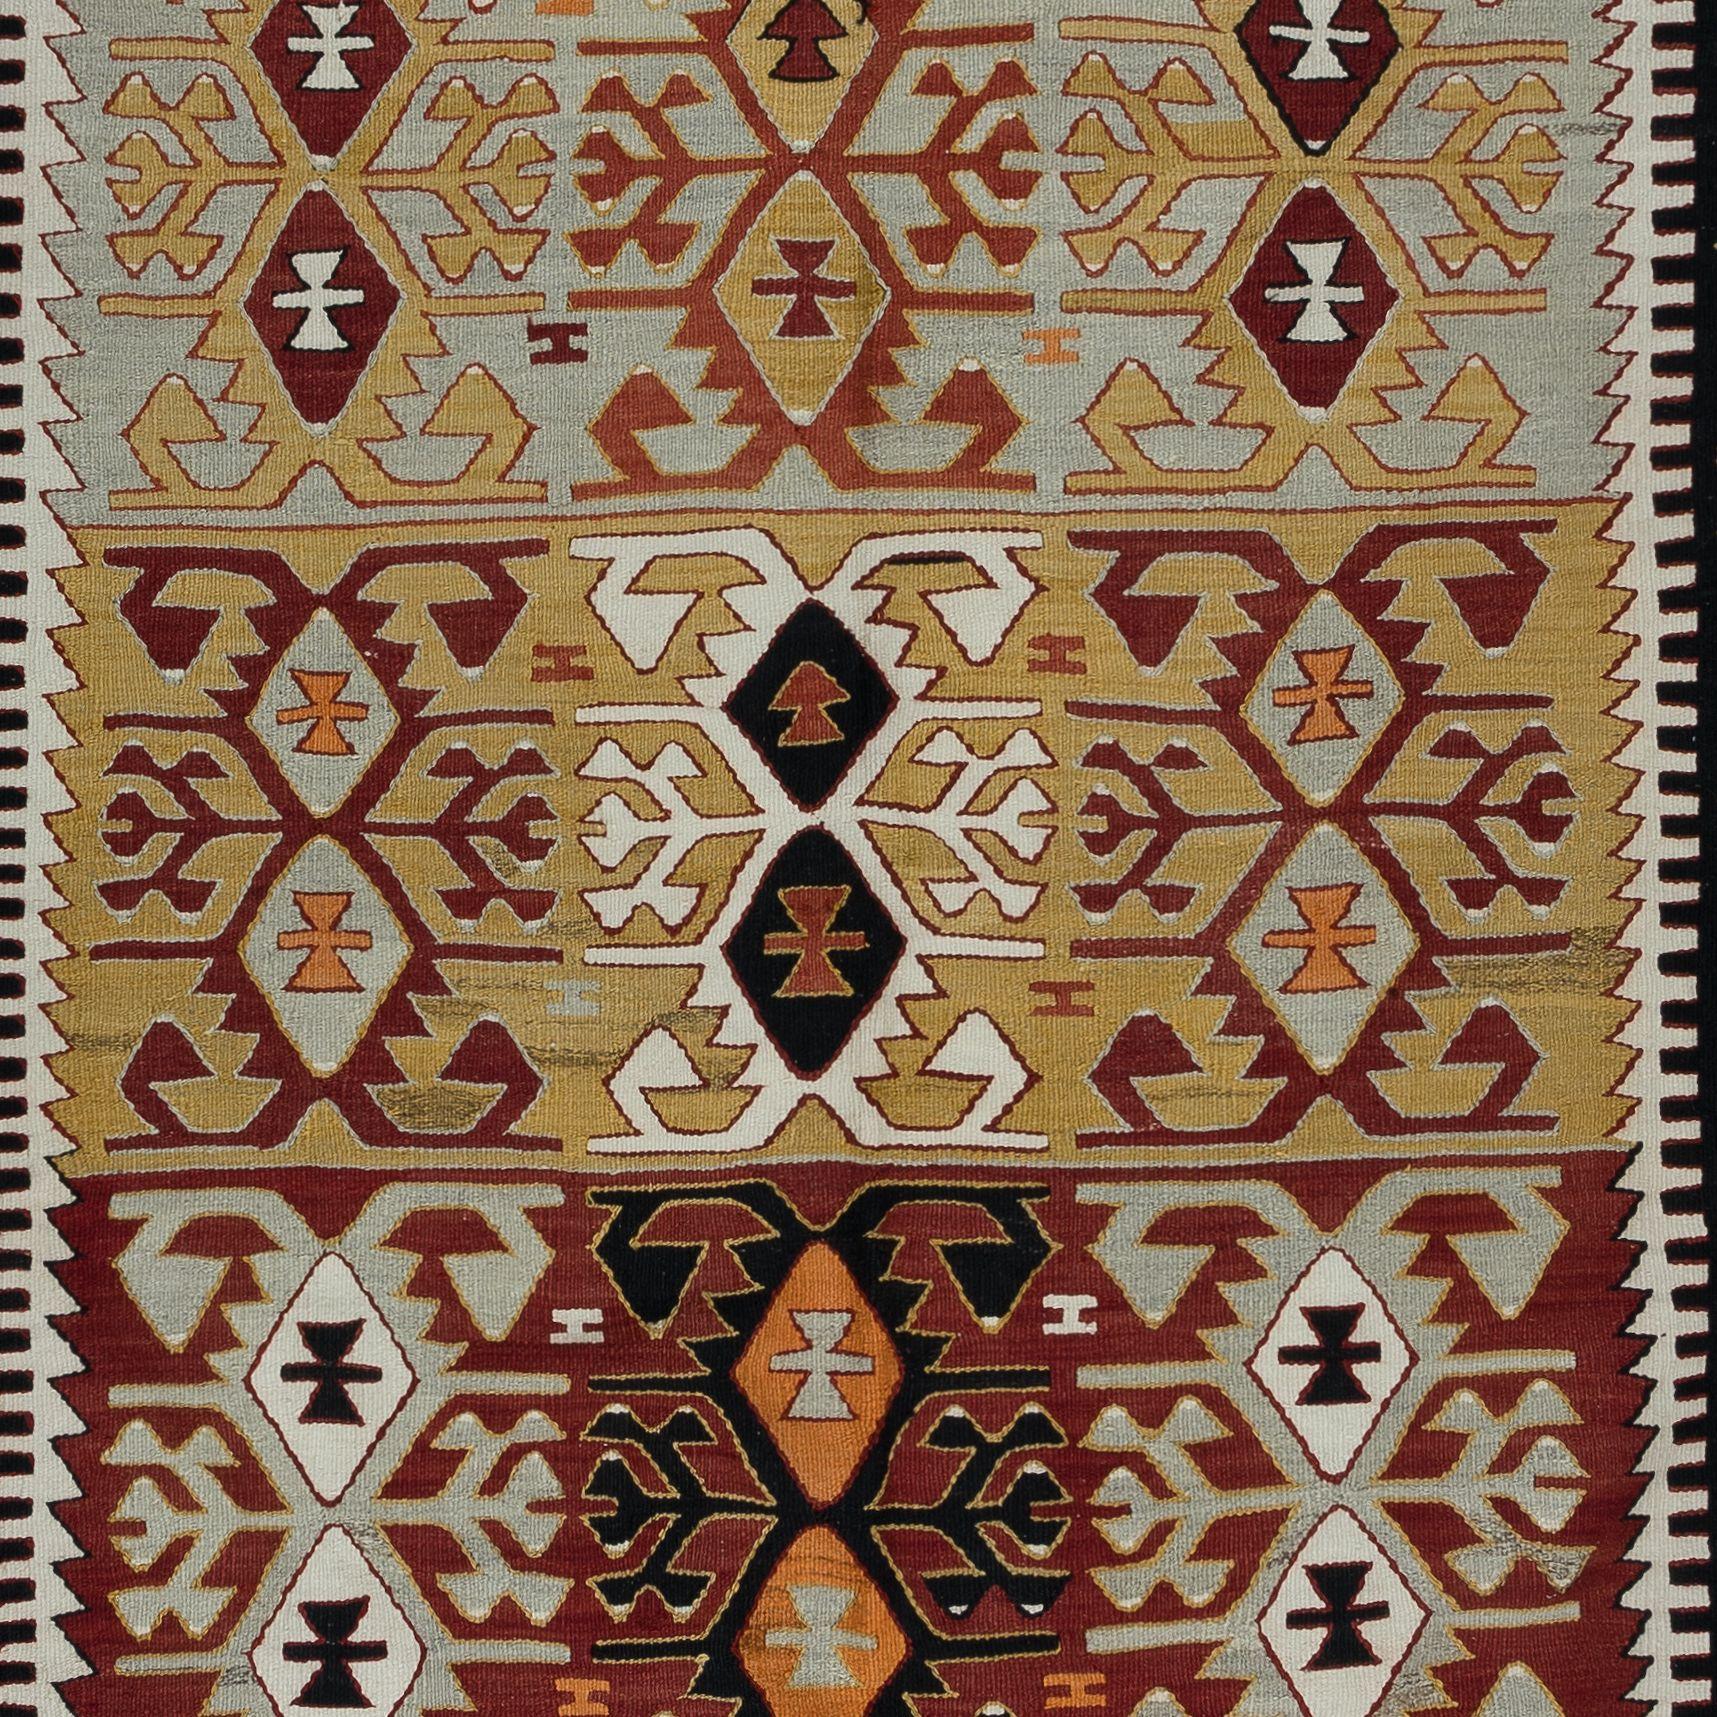 5.5x10 Ft Vintage Flat-Weave Kilim, Geometric Hand-Woven Rug, Colorful Carpet In Good Condition For Sale In Philadelphia, PA